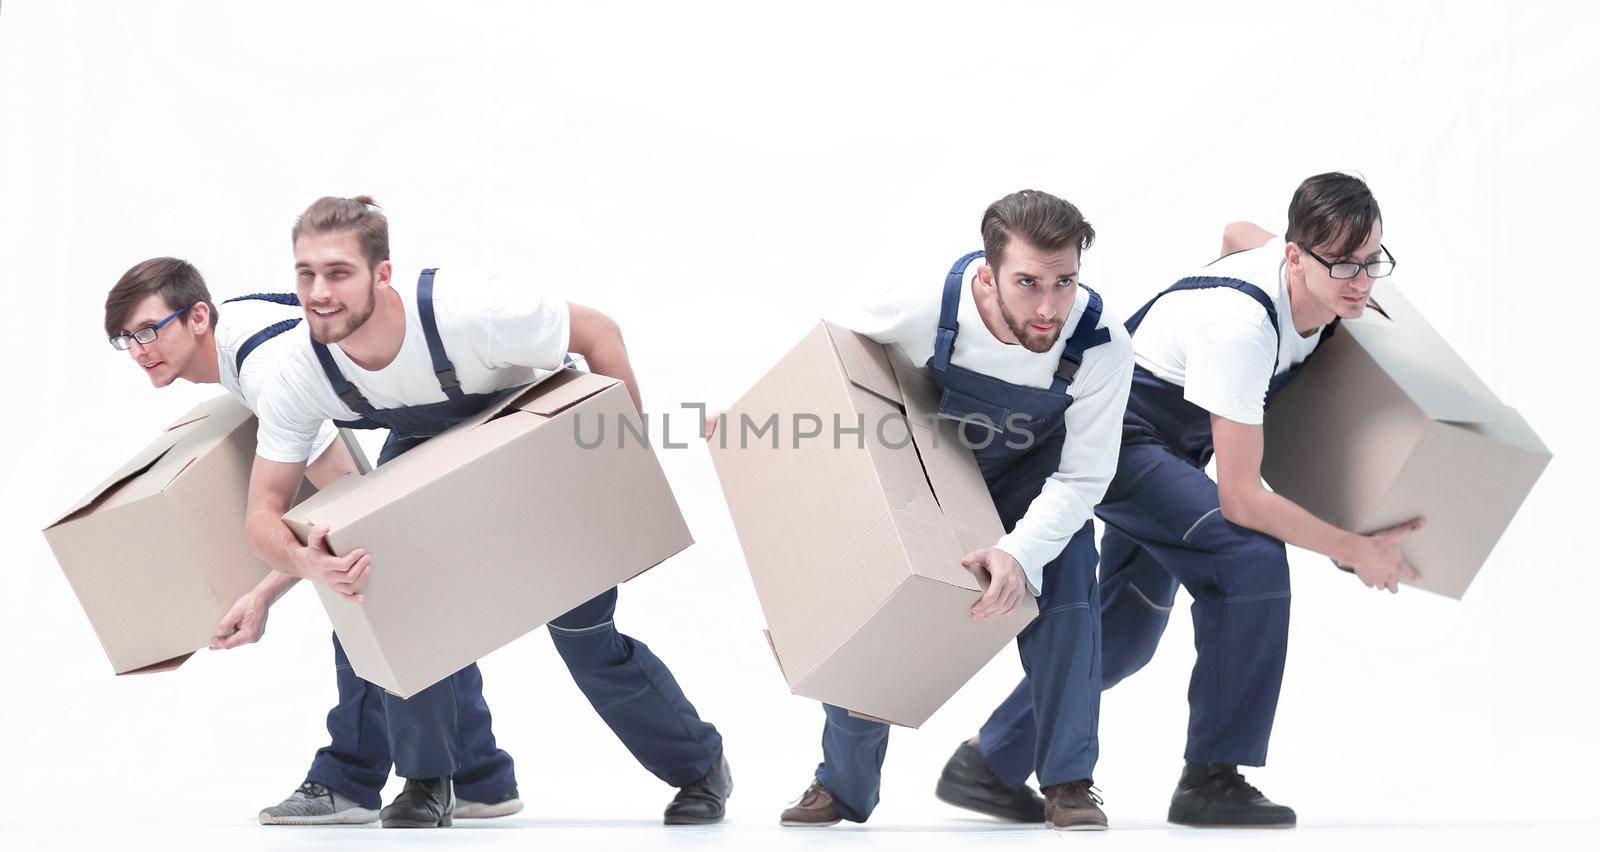 Movers in a hurry to do their job. by asdf